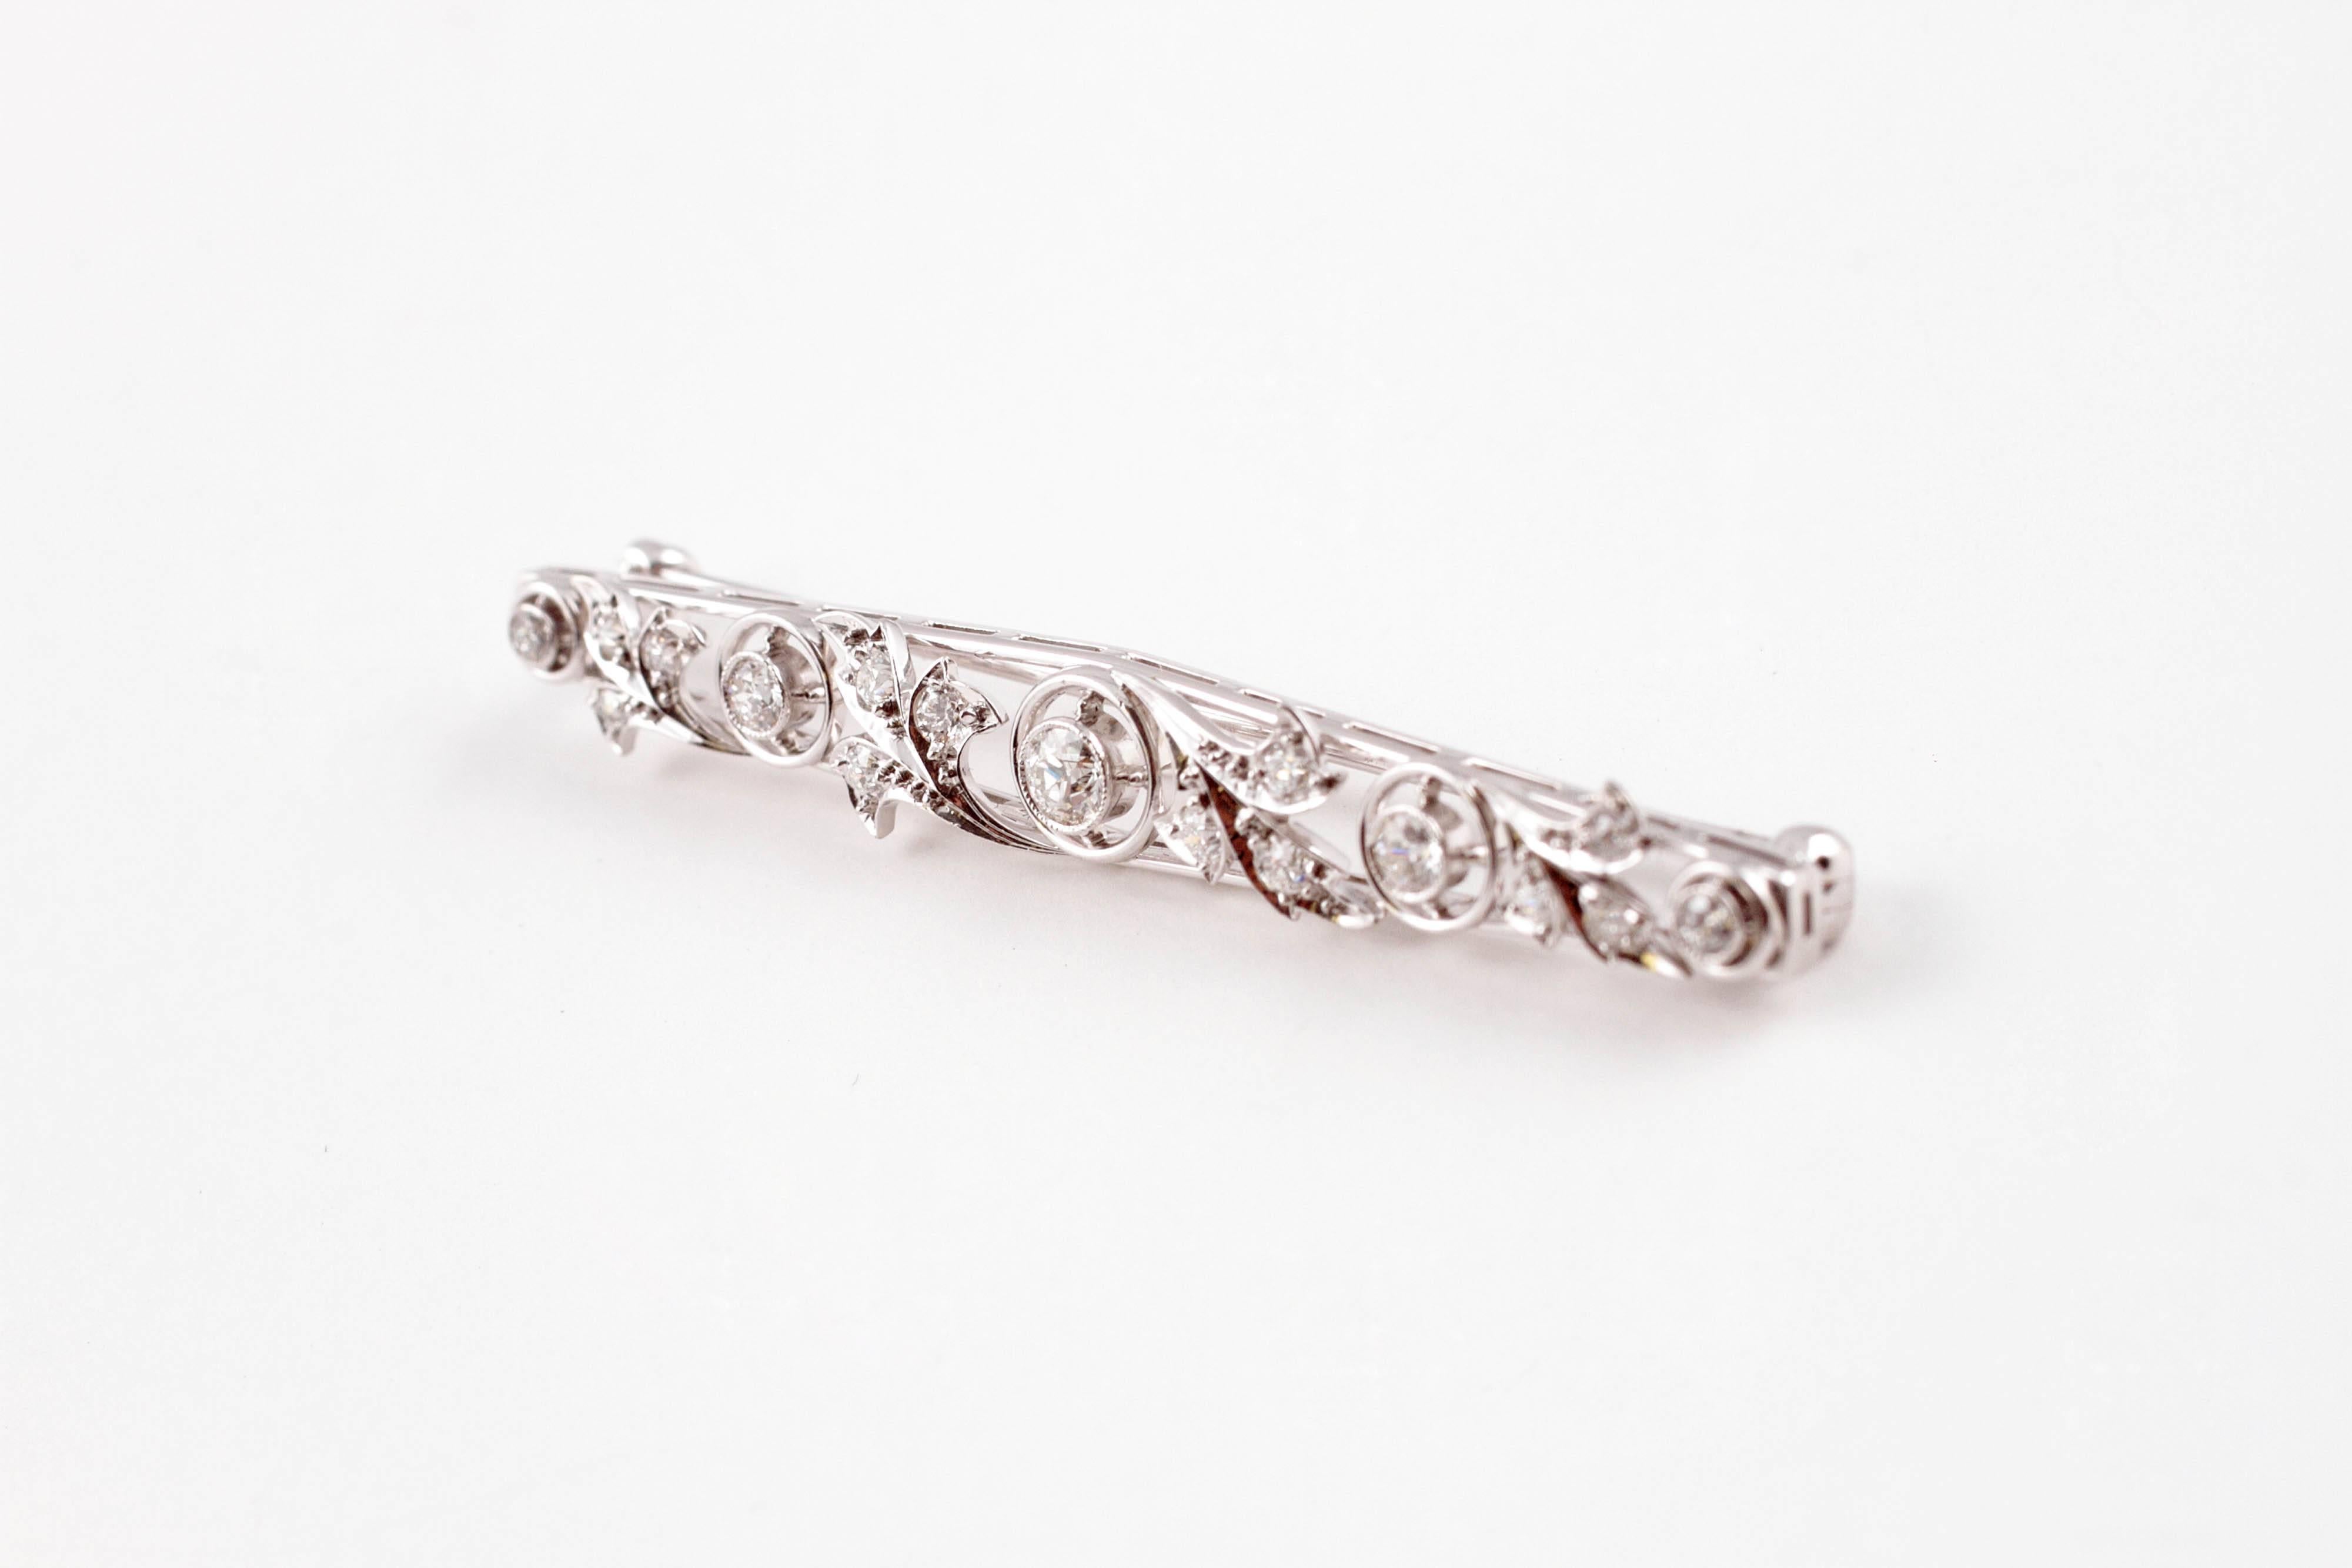 In a stunning linear form, composed of platinum, measuring 1.97 inches in length, secured with a straight pin clasp.